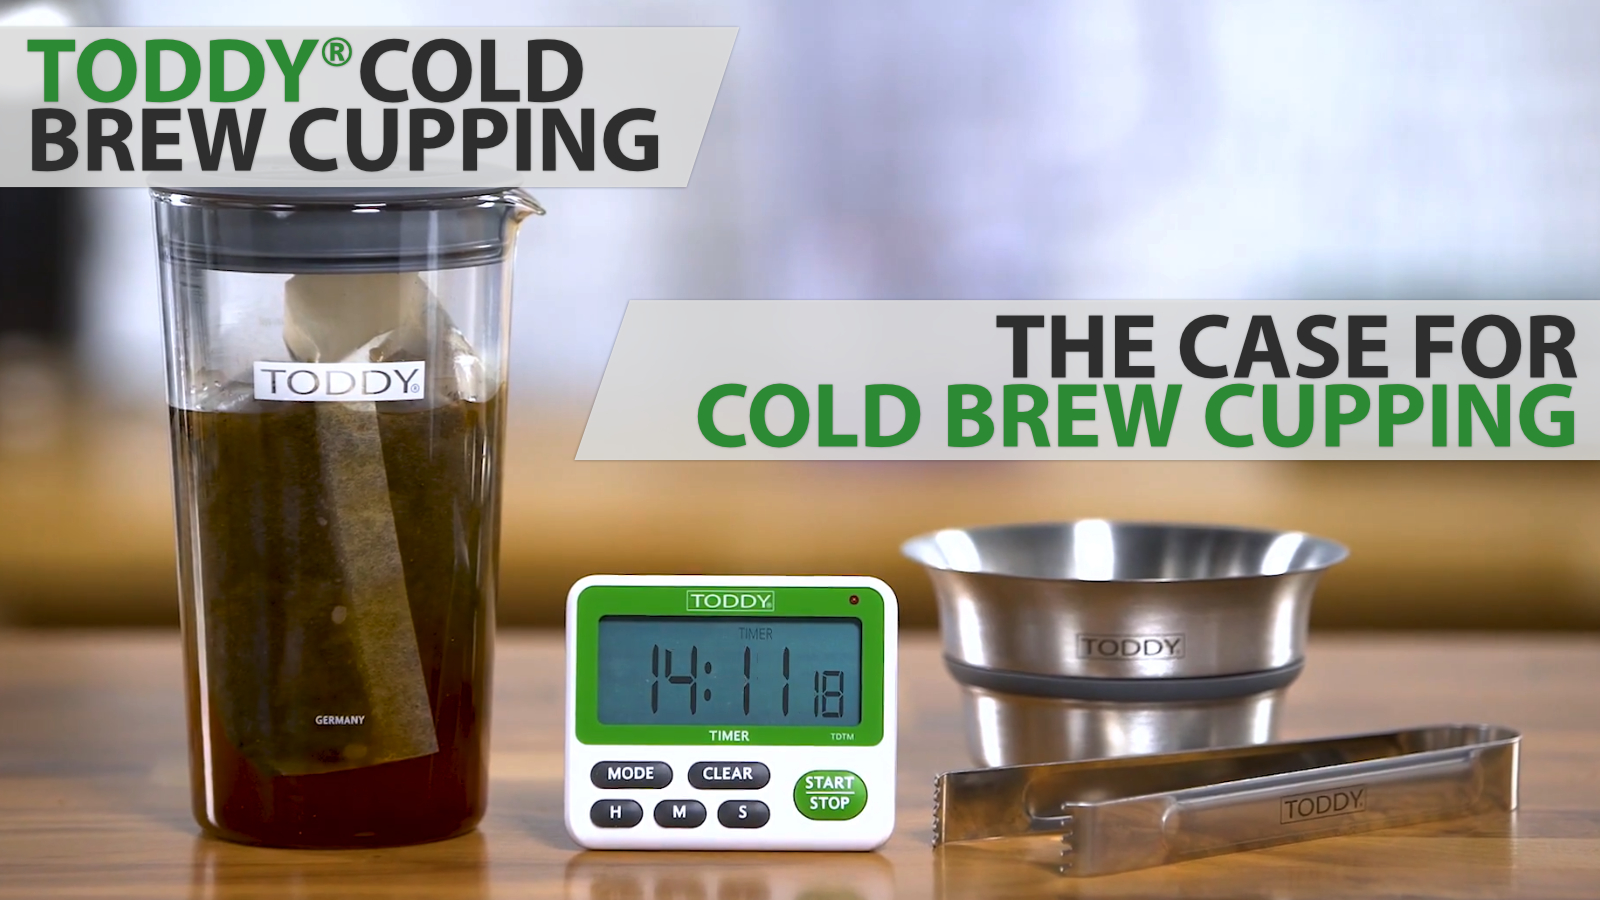 The Case For Cupping Cold Brew